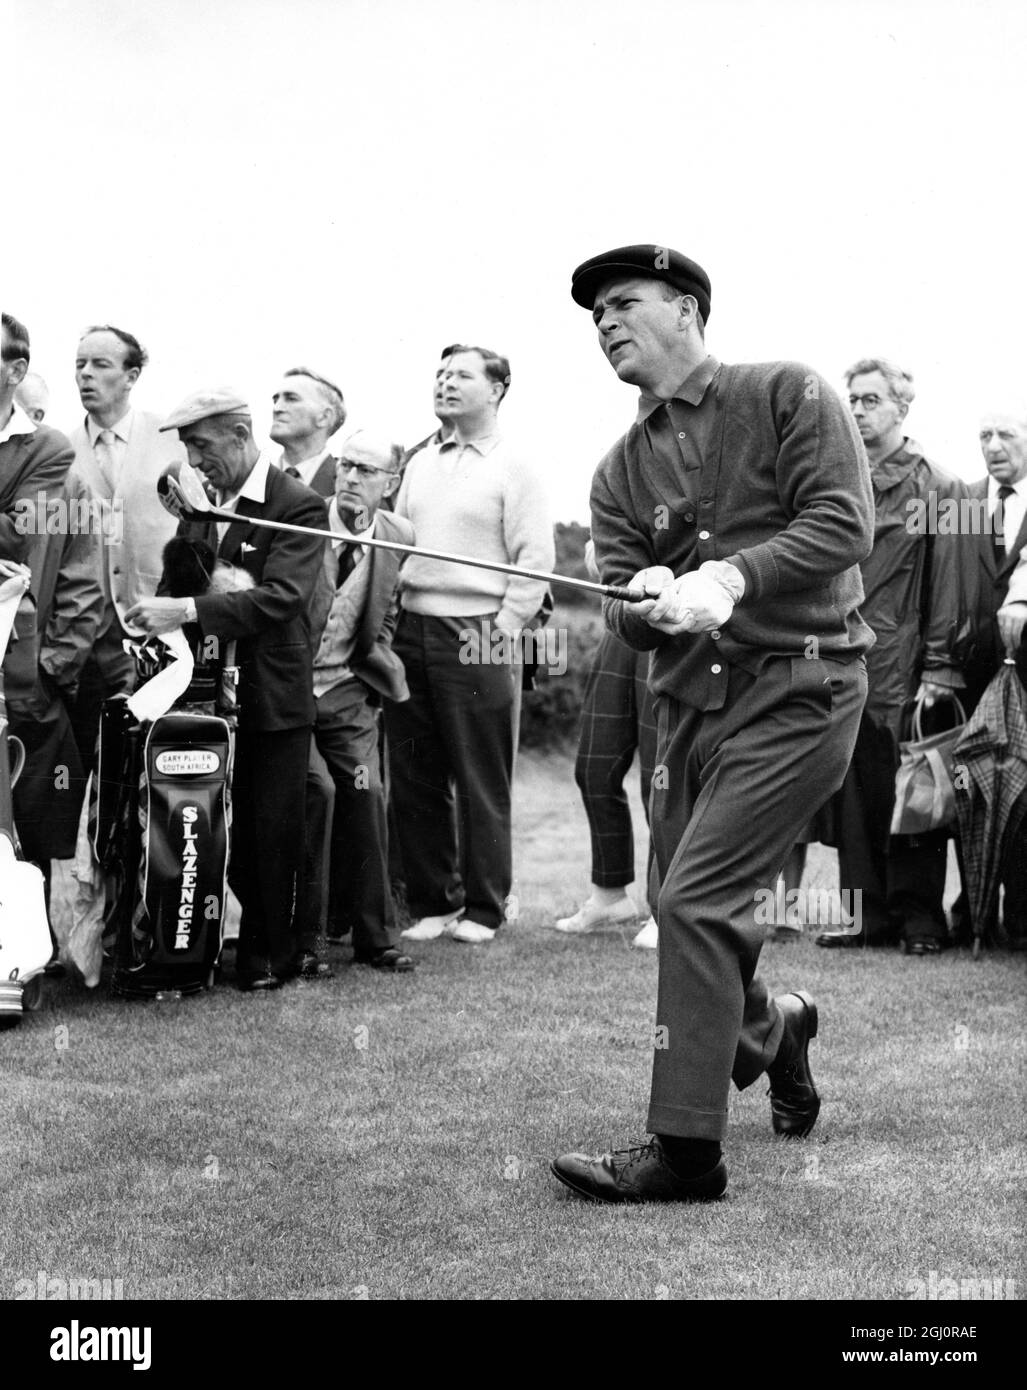 Television Golf at St Andrews. Arnold Palmer, of the USA and South Africa's Gary Player are to play over the Old Course at St Andrews today for a 10,000 dollar prize in a TV competition. The two players were out on the course practising yesterday afternoon. 4 July 1961 Stock Photo